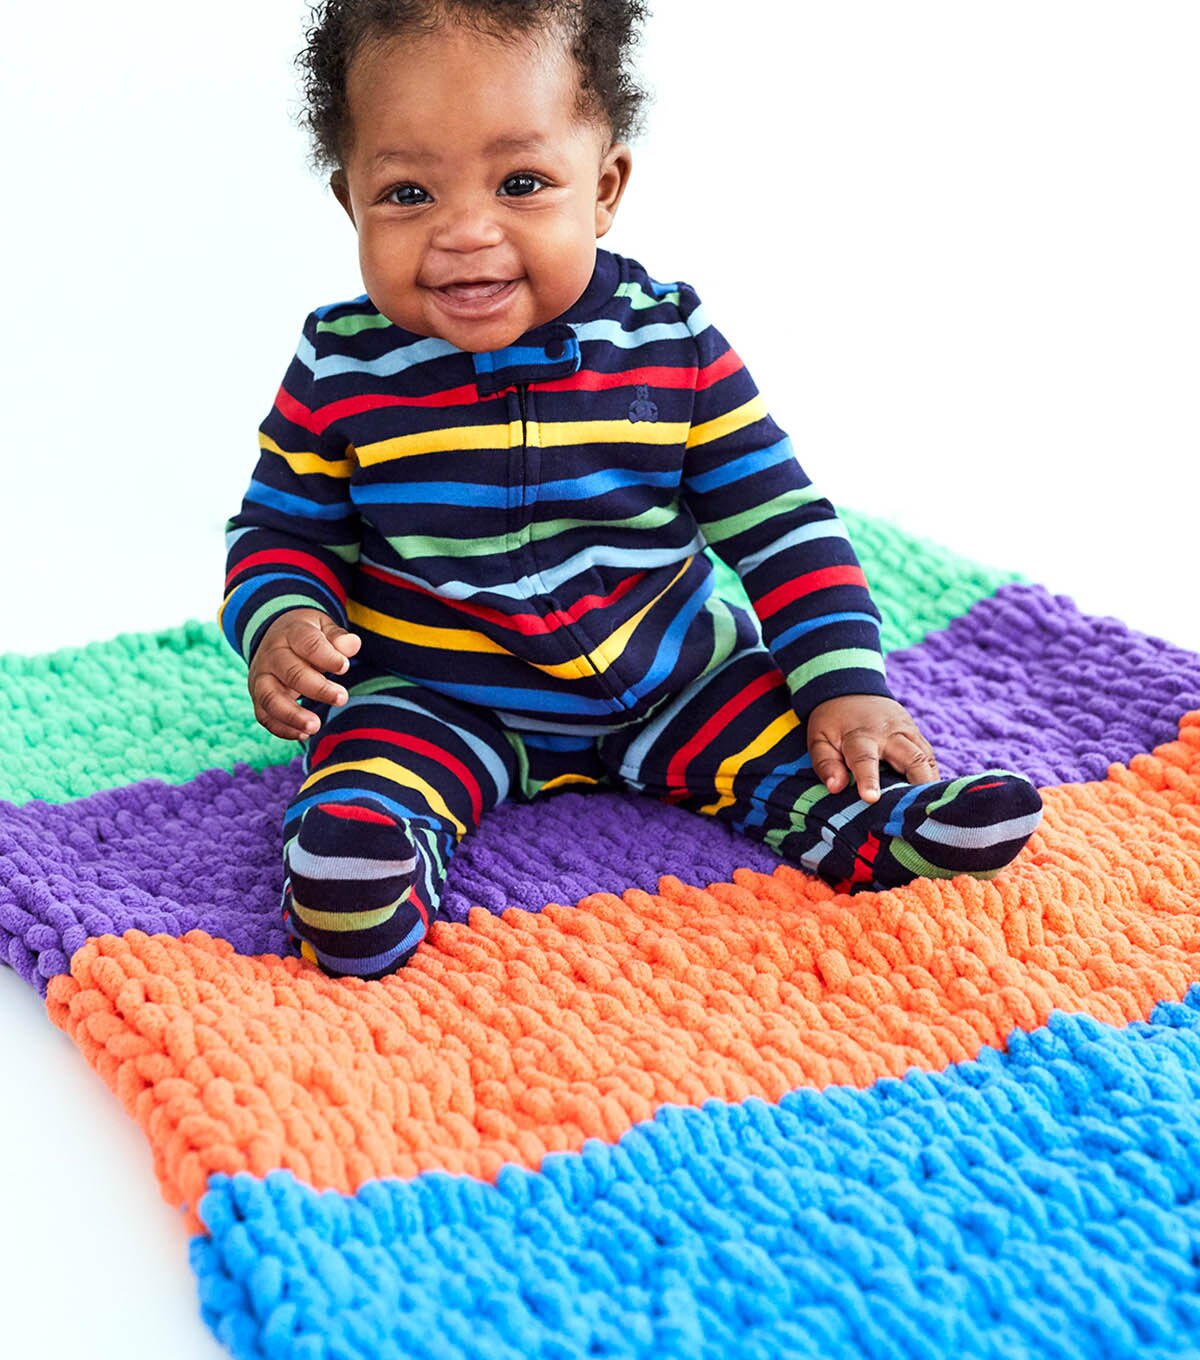 How To Make a Off the Hook Bright Baby Mat | JOANN